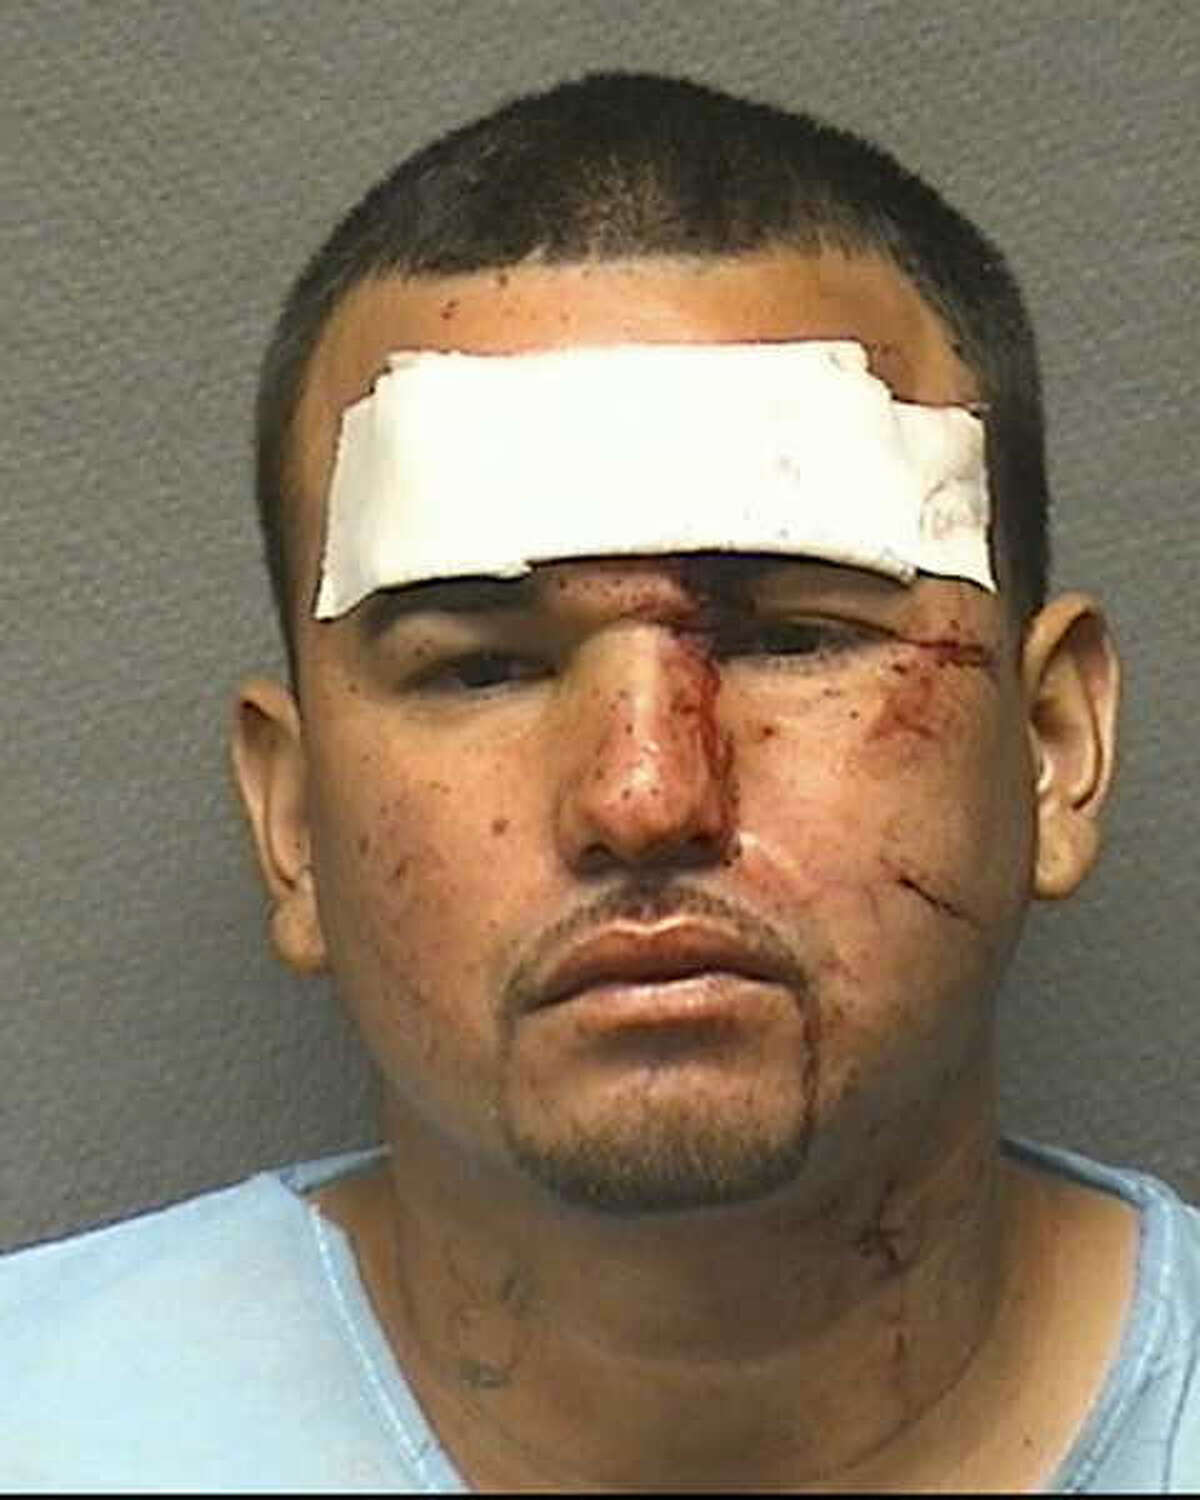 Johoan Rodriguez, 26, was jailed without bail. Photo provided by the Houston Police Department